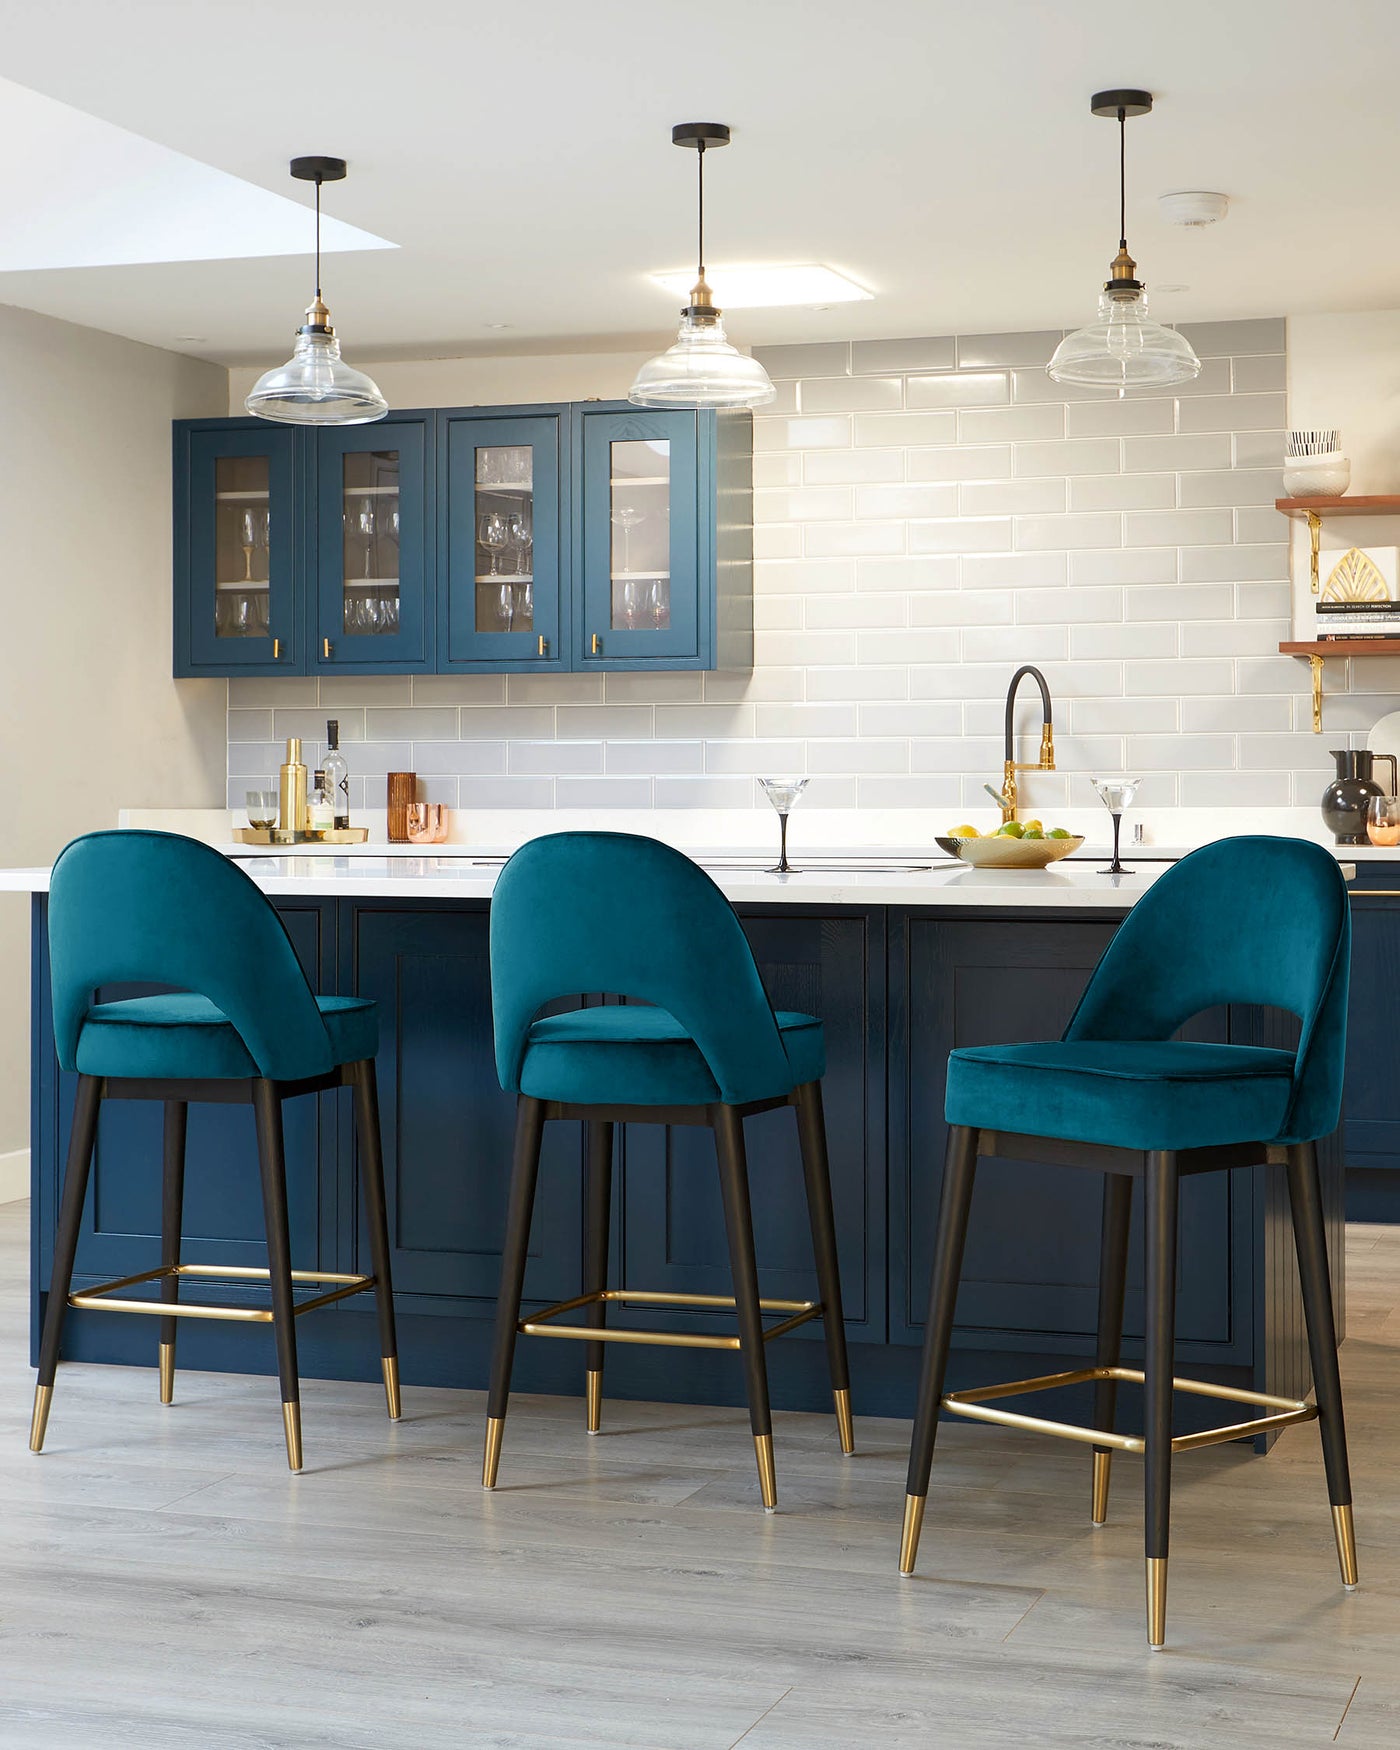 Three contemporary teal blue velvet bar stools with black legs and gold footrests in a modern kitchen setting.